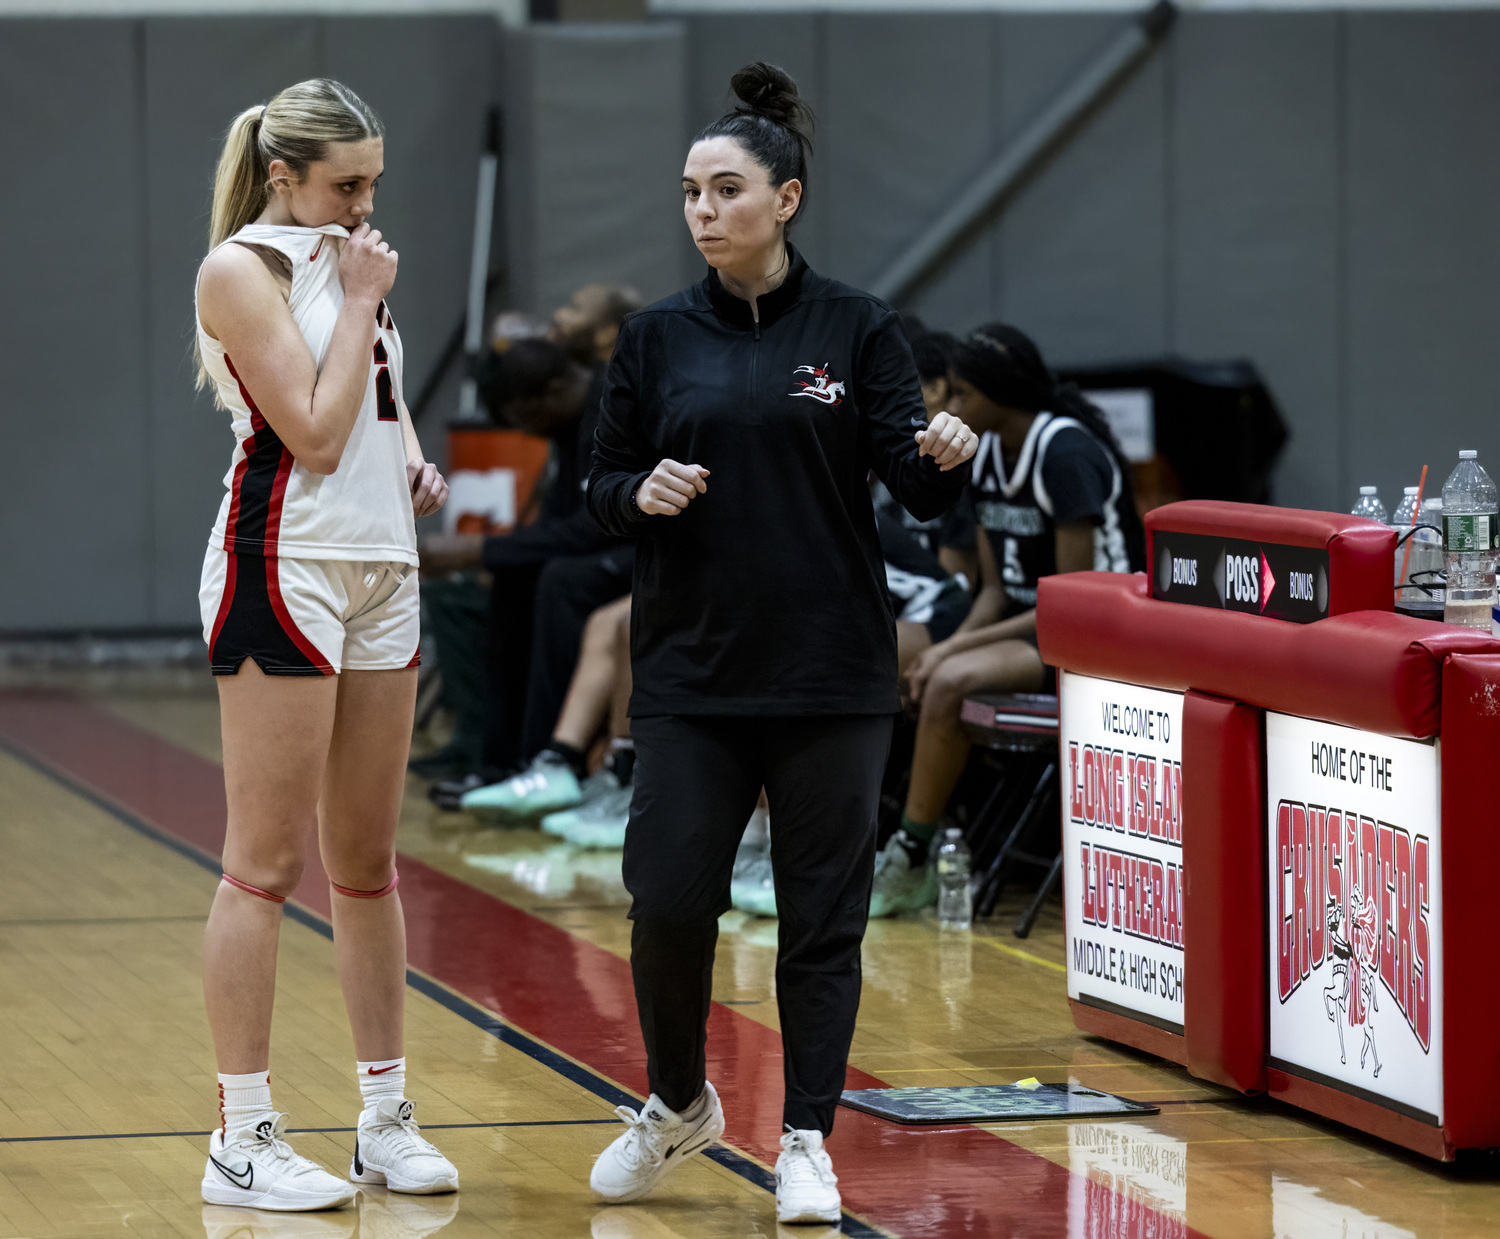 Long Island Lutheran head coach Christina Raiti speaks to Coco Lohmiller during a break in the action. M. FIDEL PHOTOGRAPHY